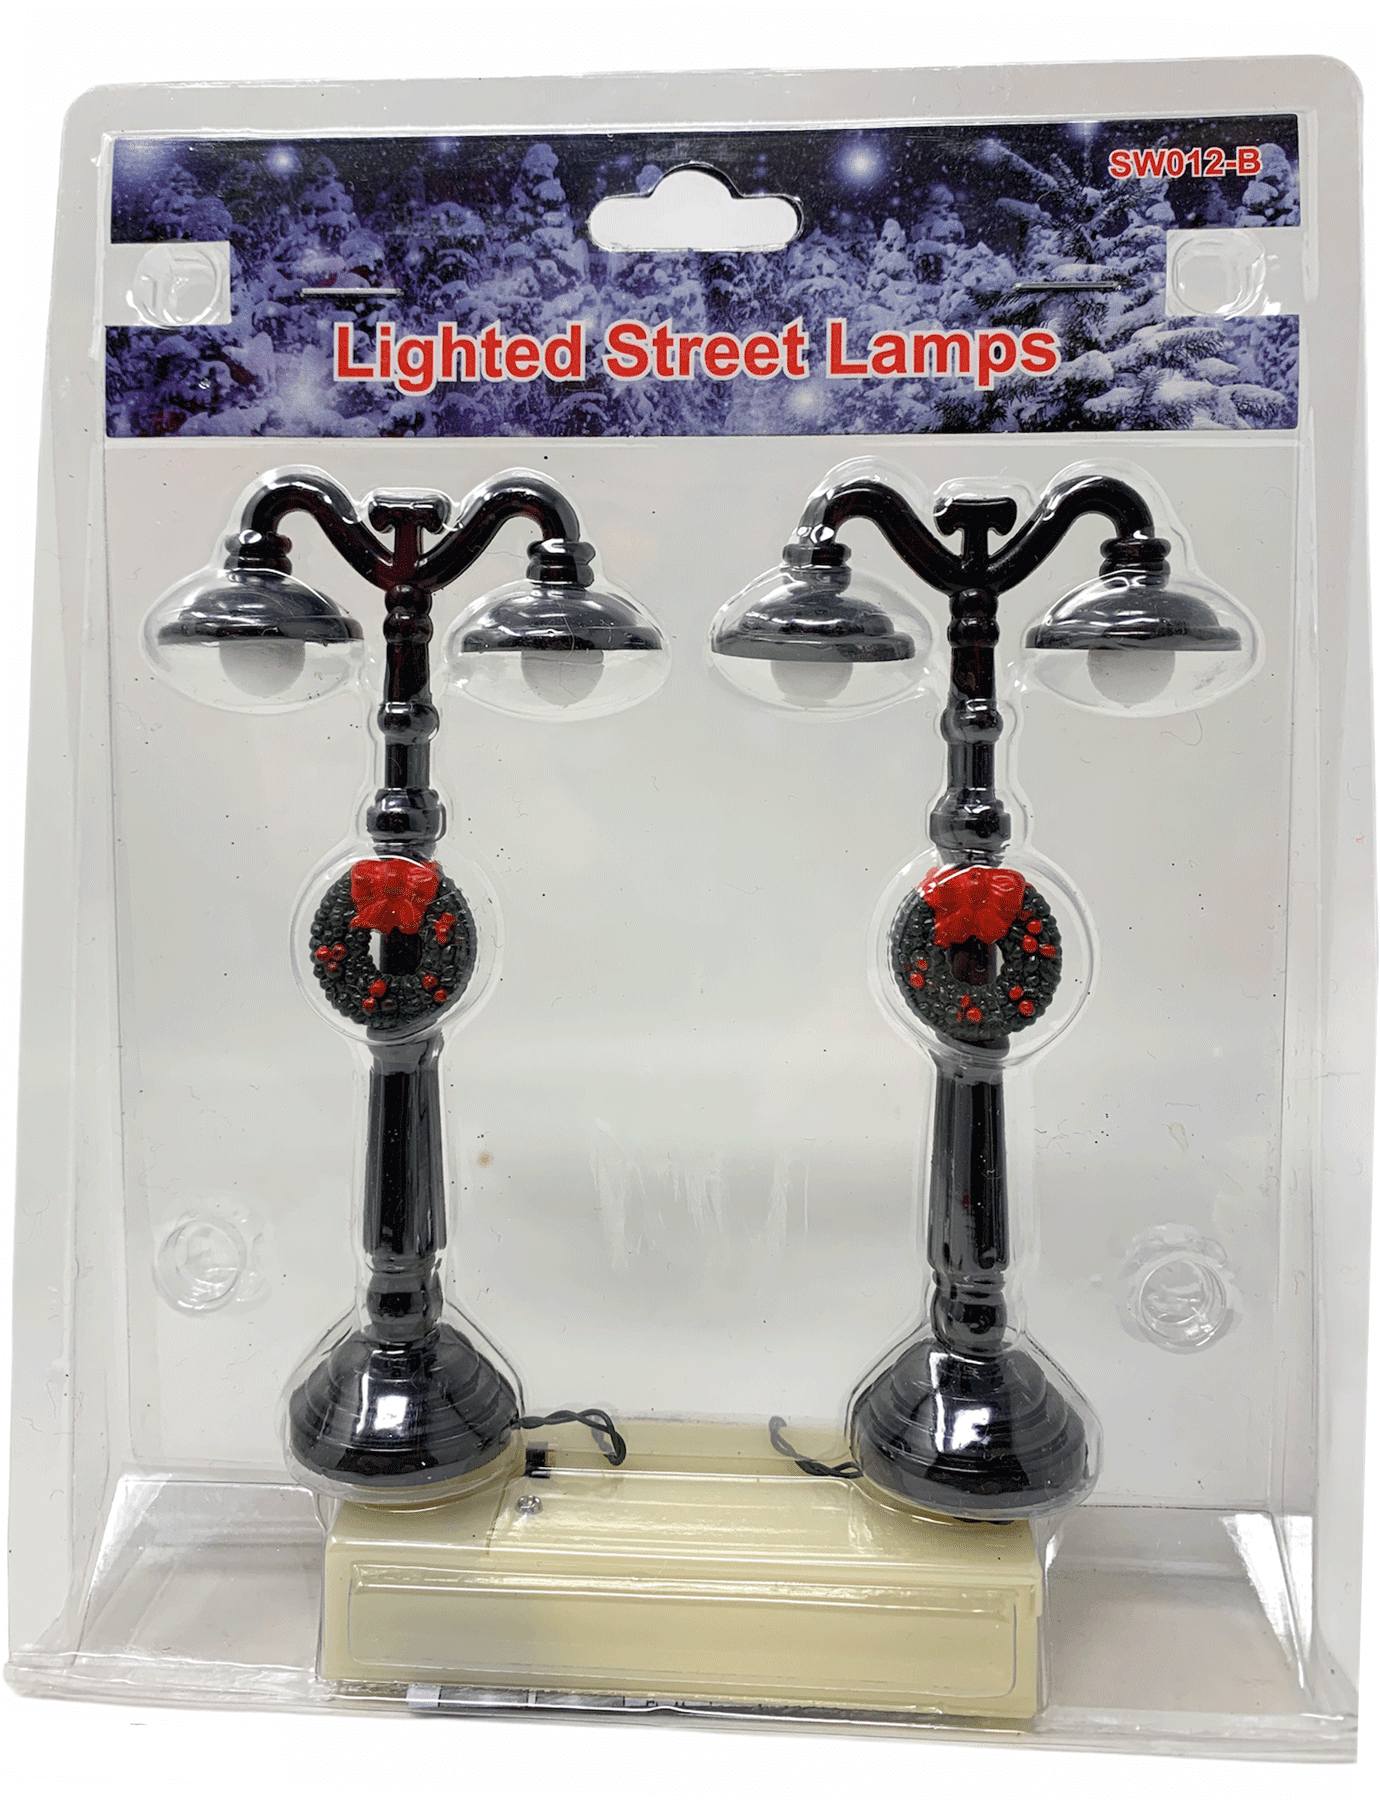 Christmas Village Collection Accessory Lighted Street Lamps with Wreaths, Set of 2